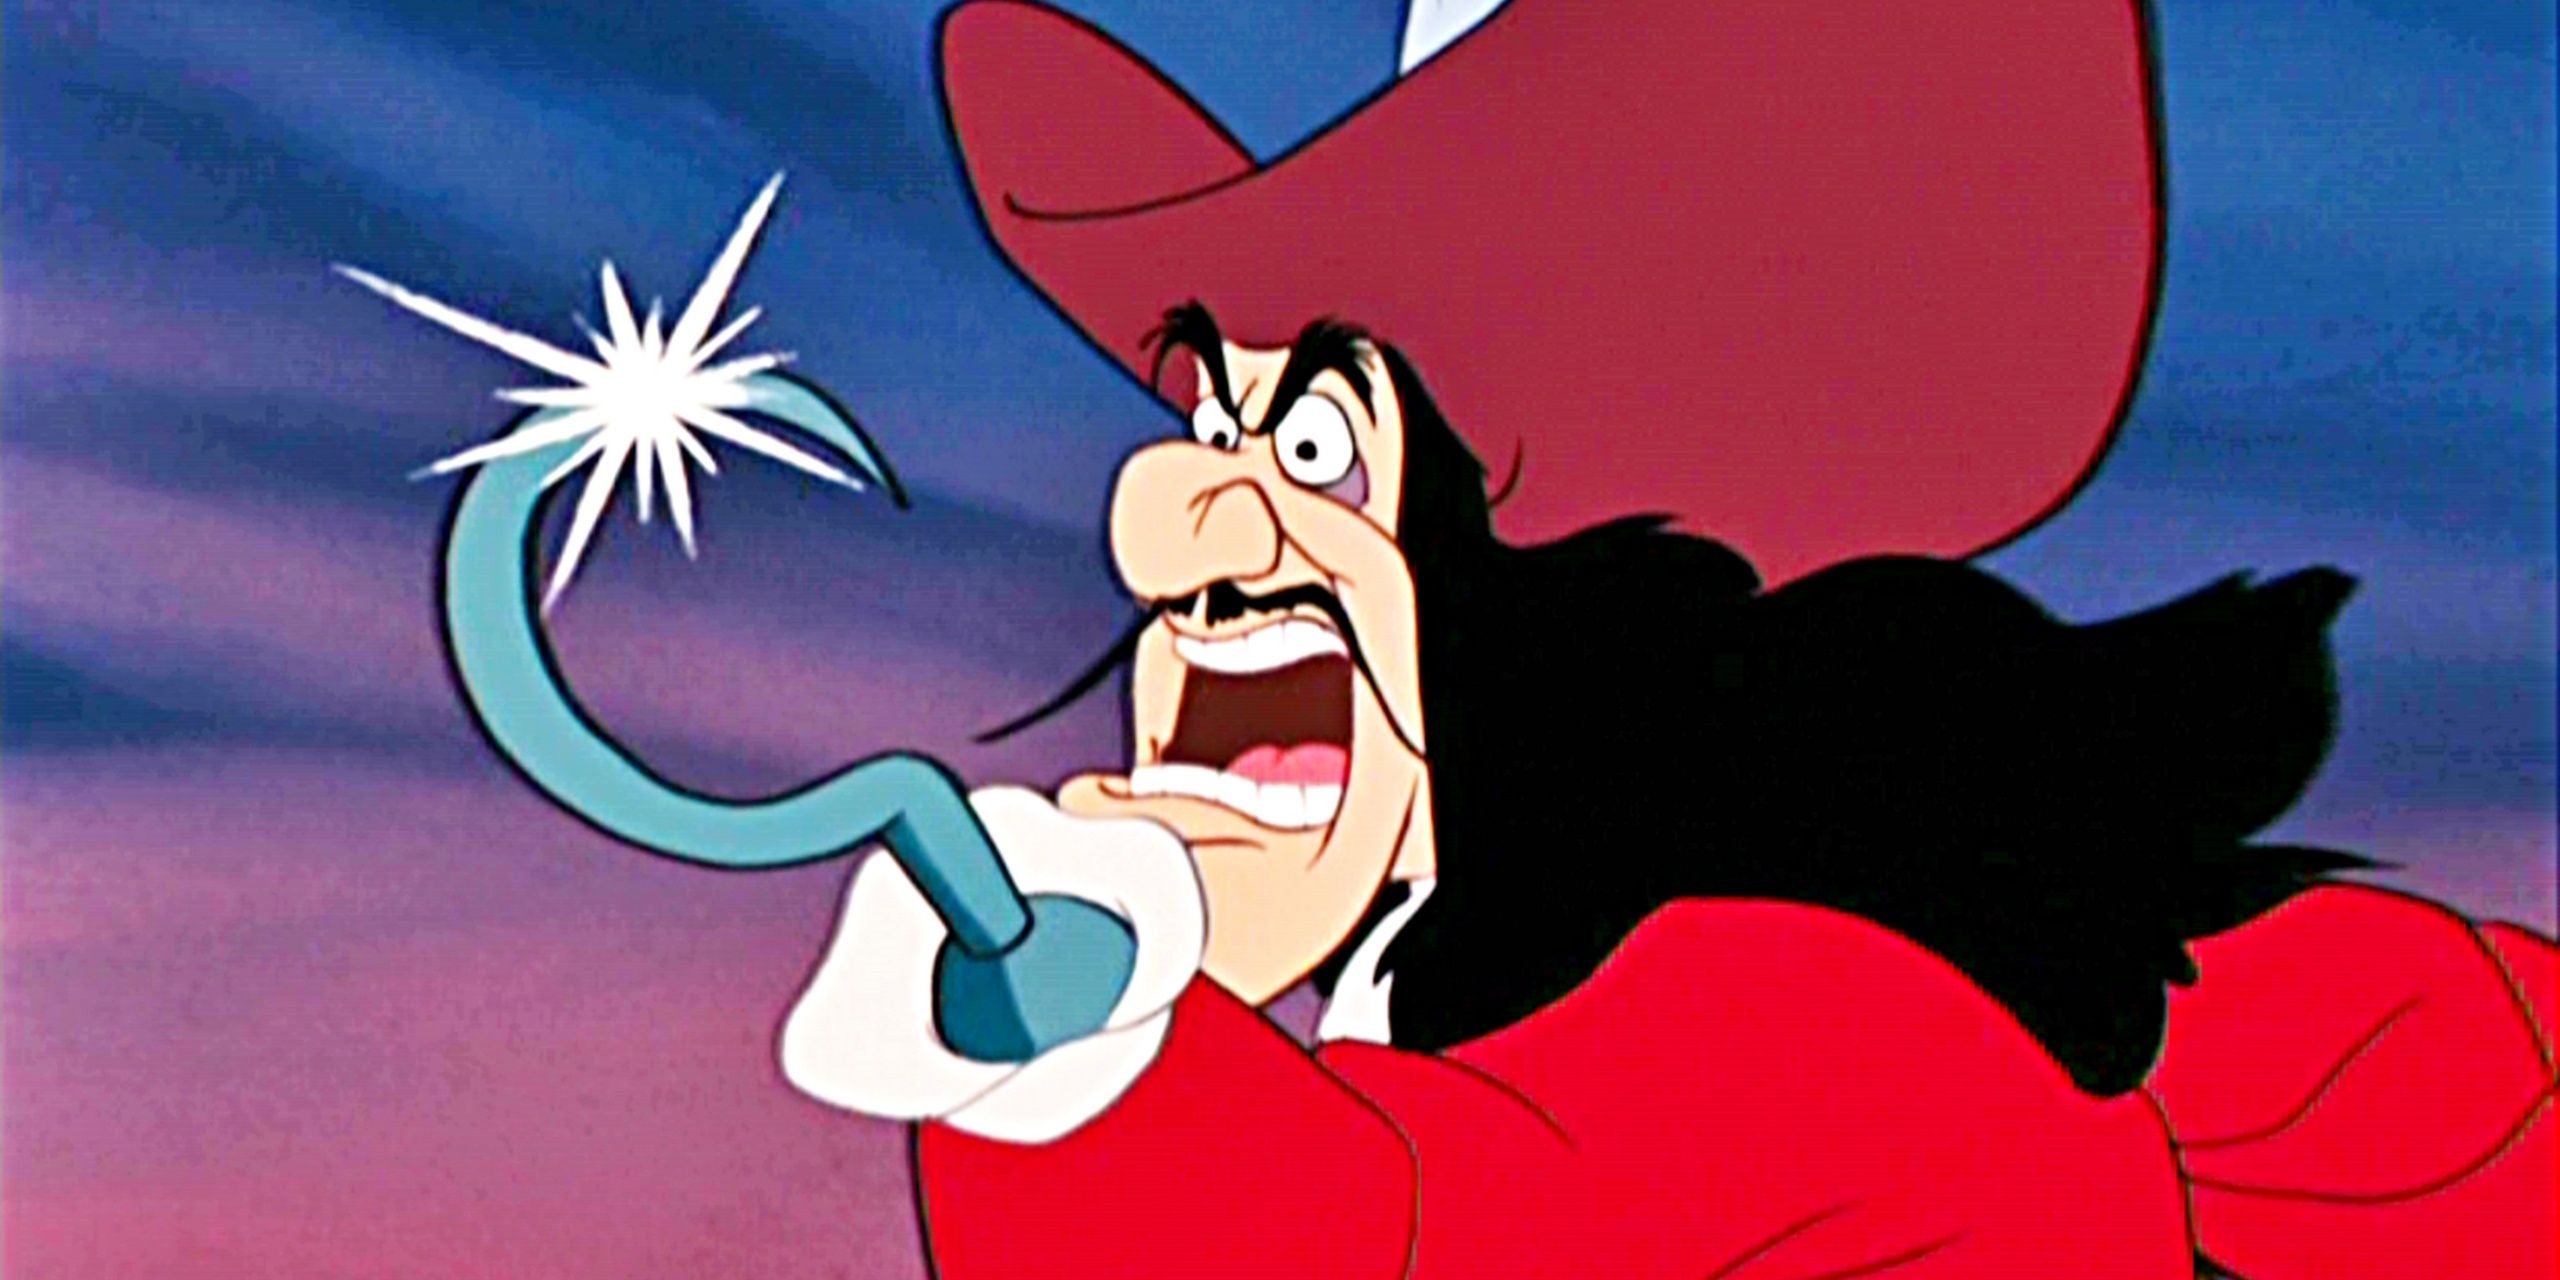 Captain Hook holding up his hook in Peter Pan.